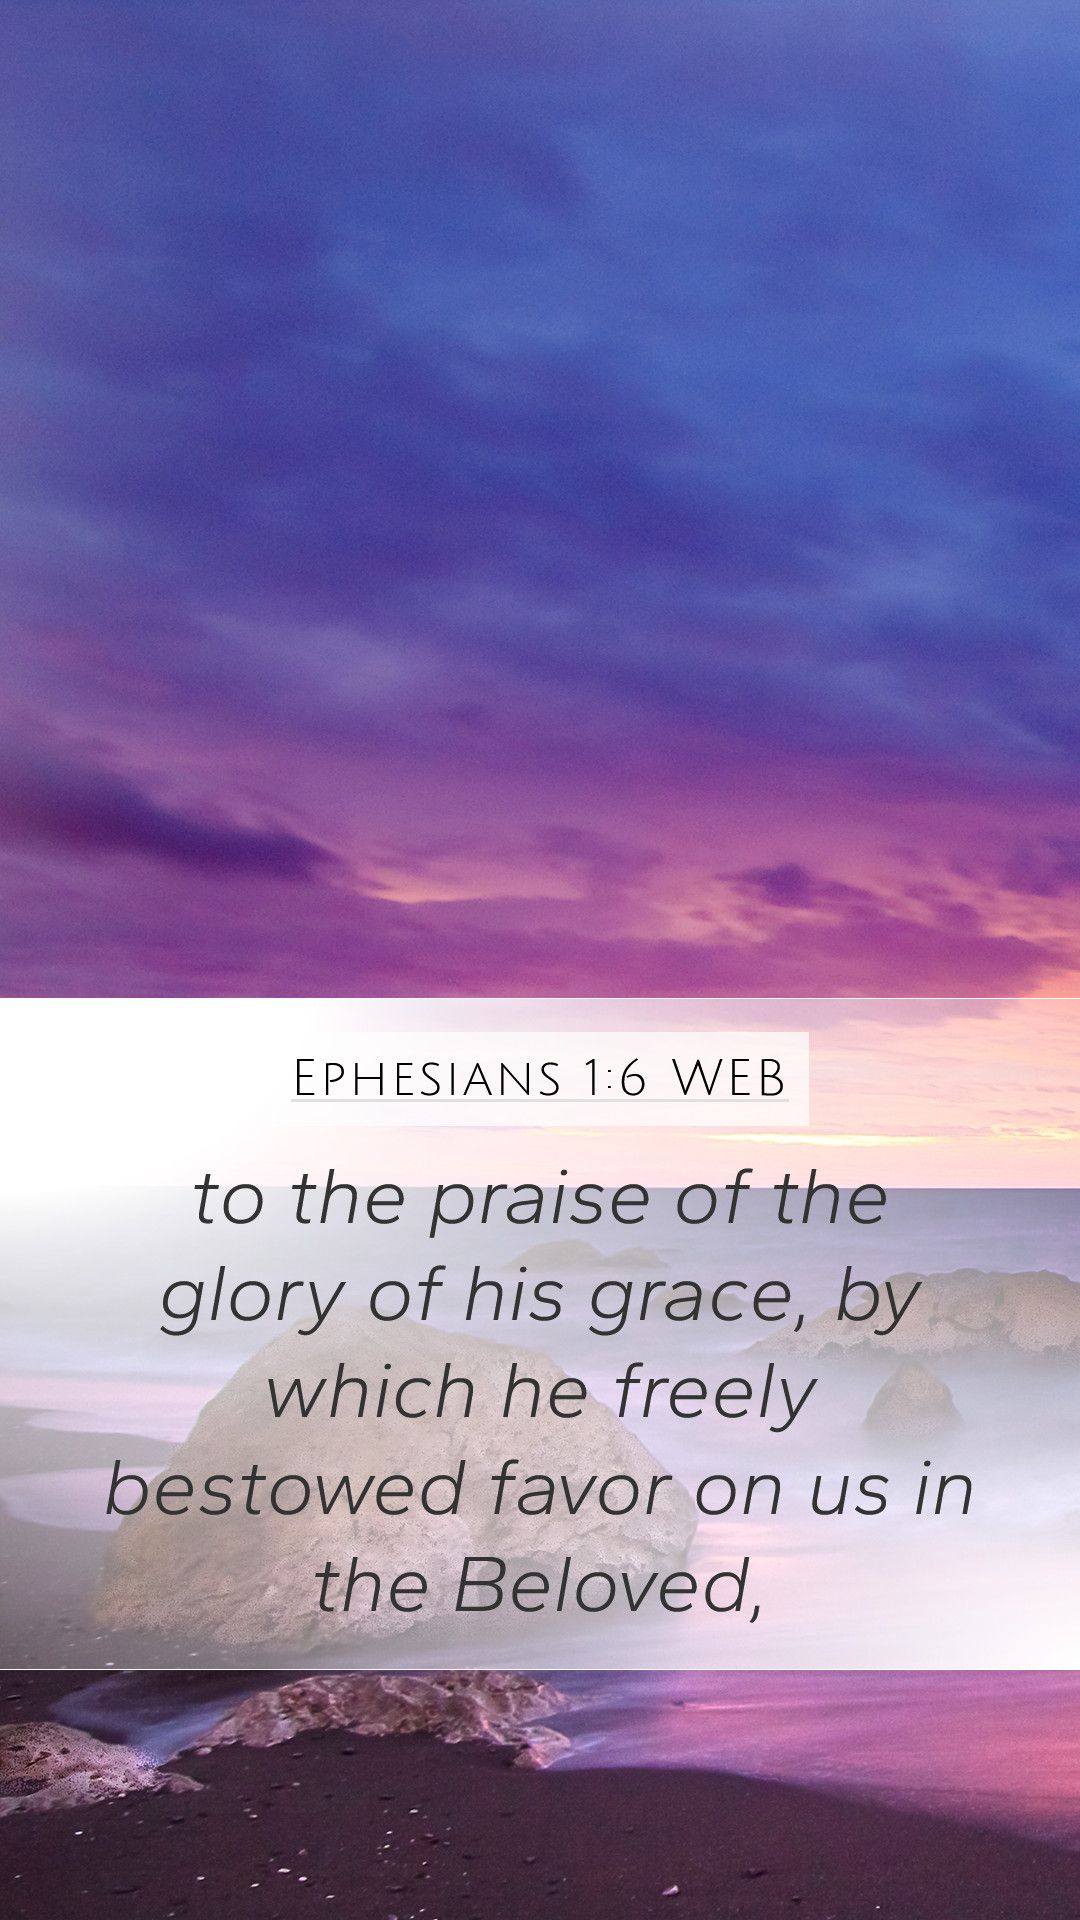 Ephesians 1:6 WEB Mobile Phone Wallpaper the praise of the glory of his grace